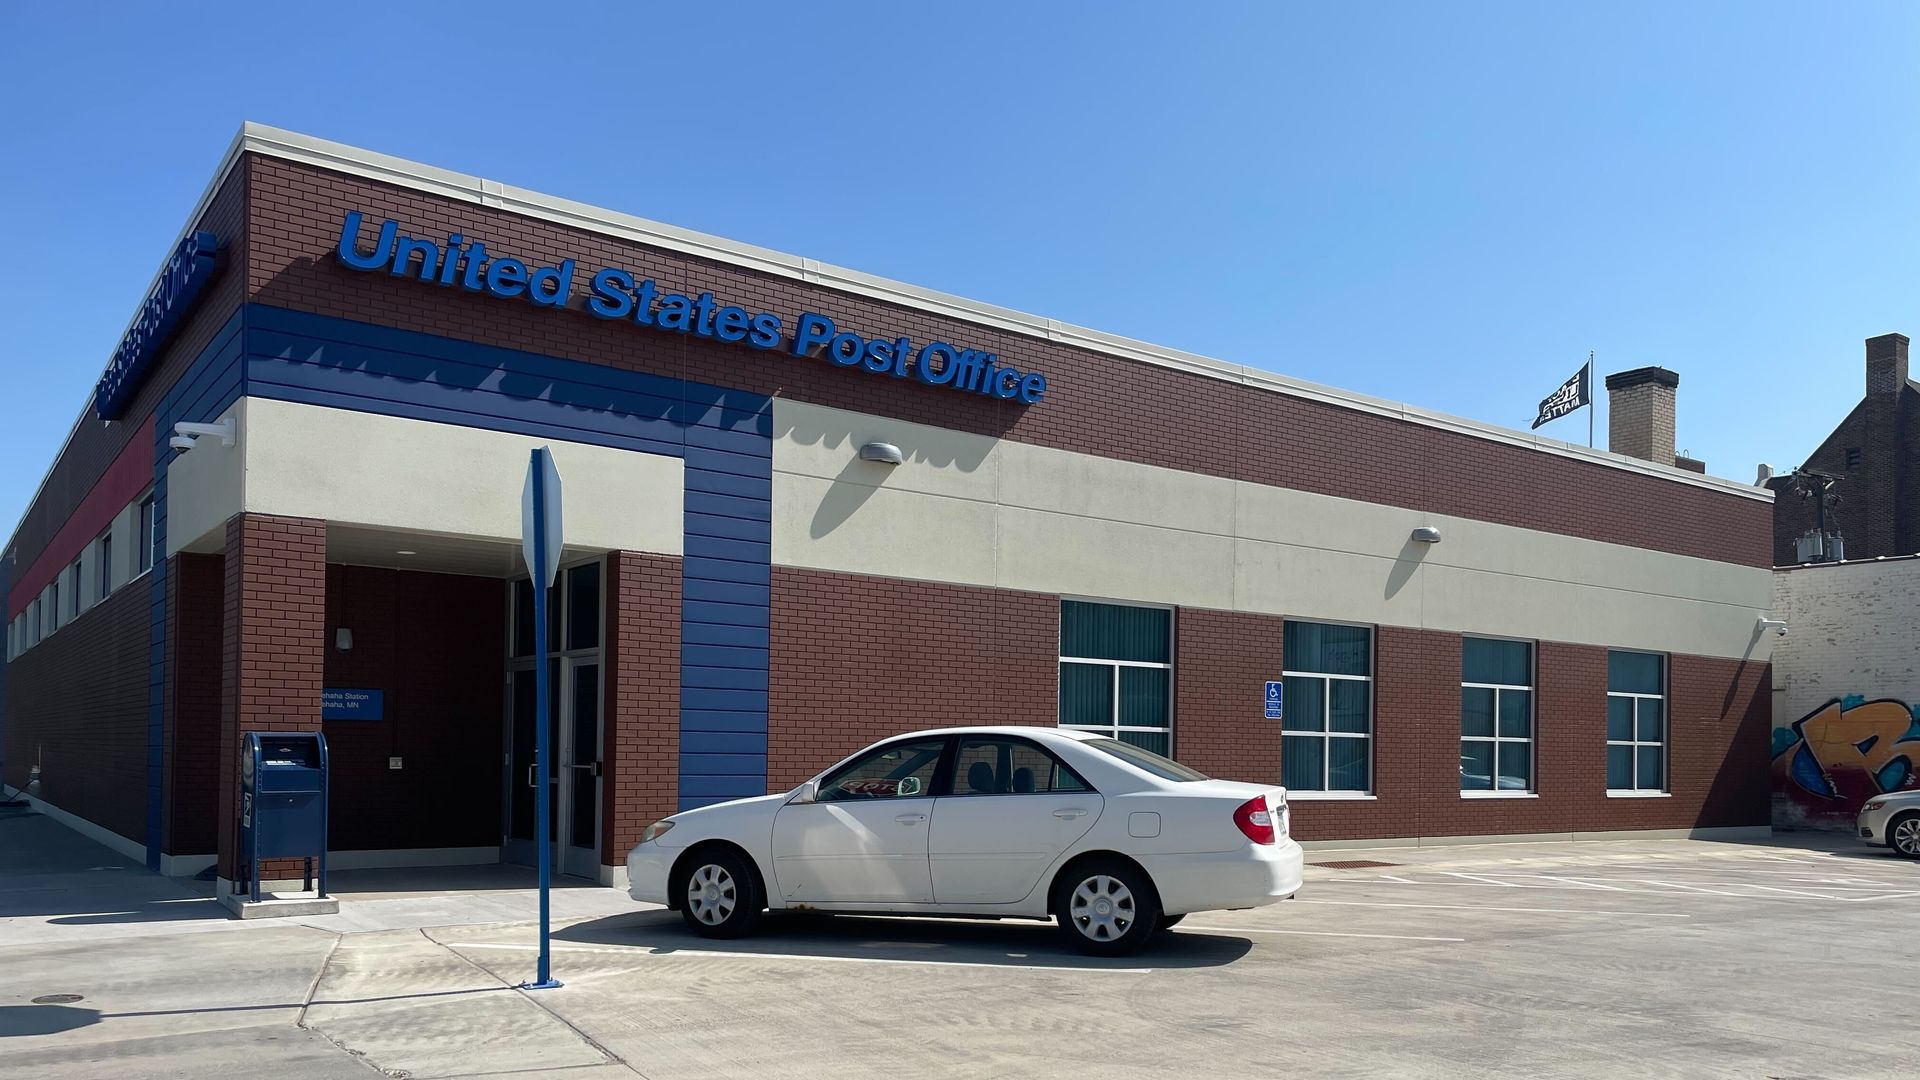 brick building with blue united states post office lettering and white car out front